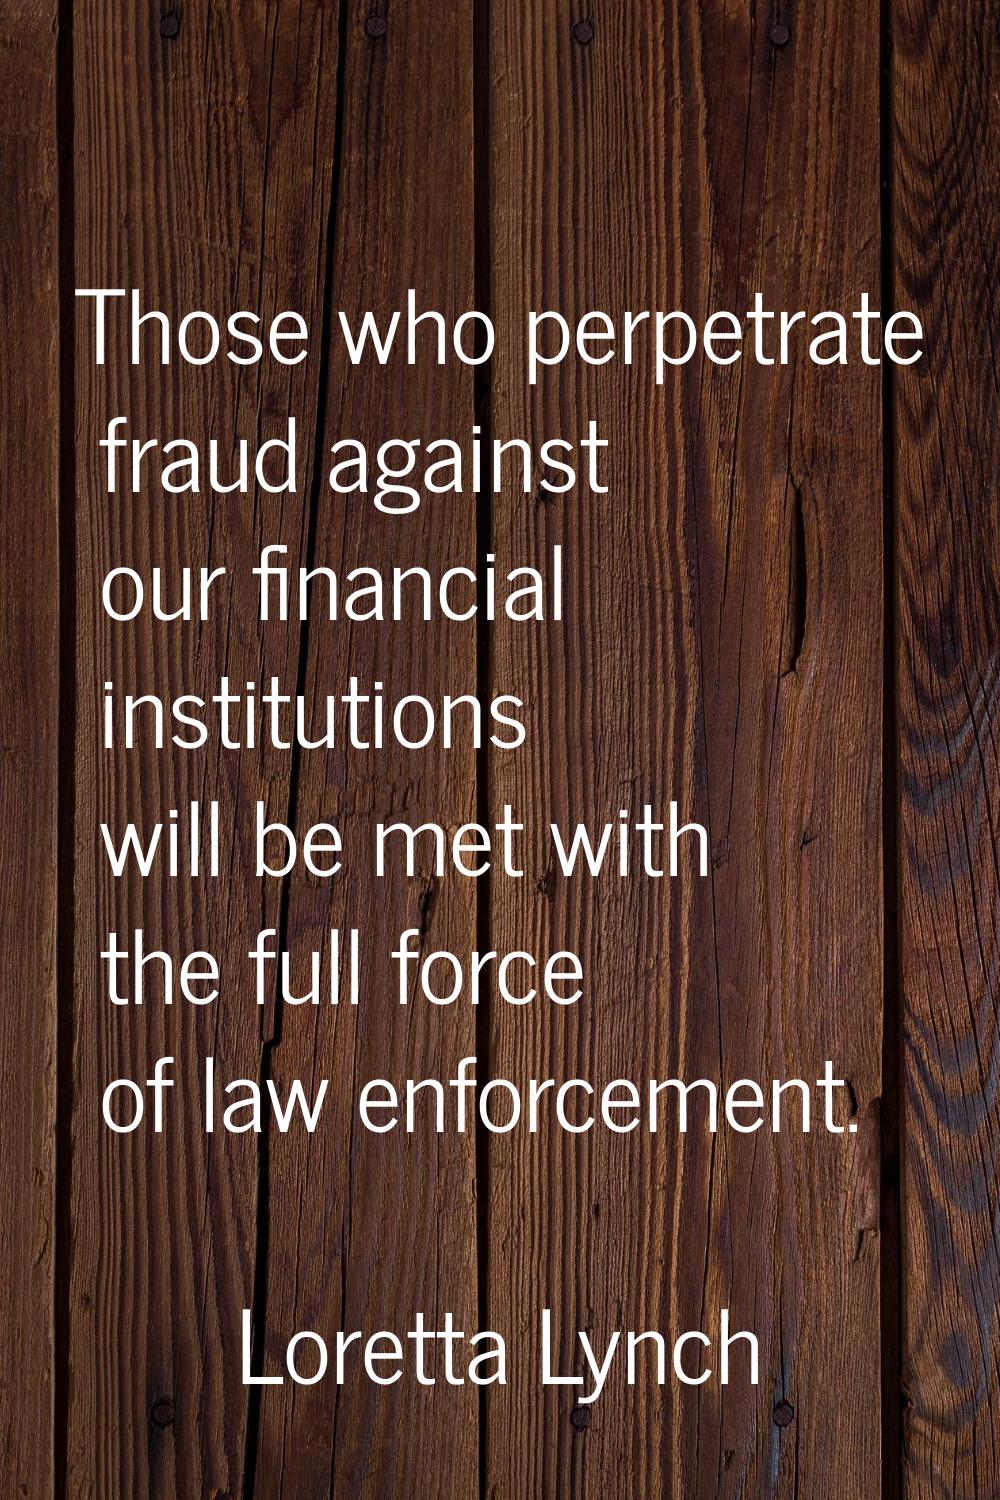 Those who perpetrate fraud against our financial institutions will be met with the full force of la